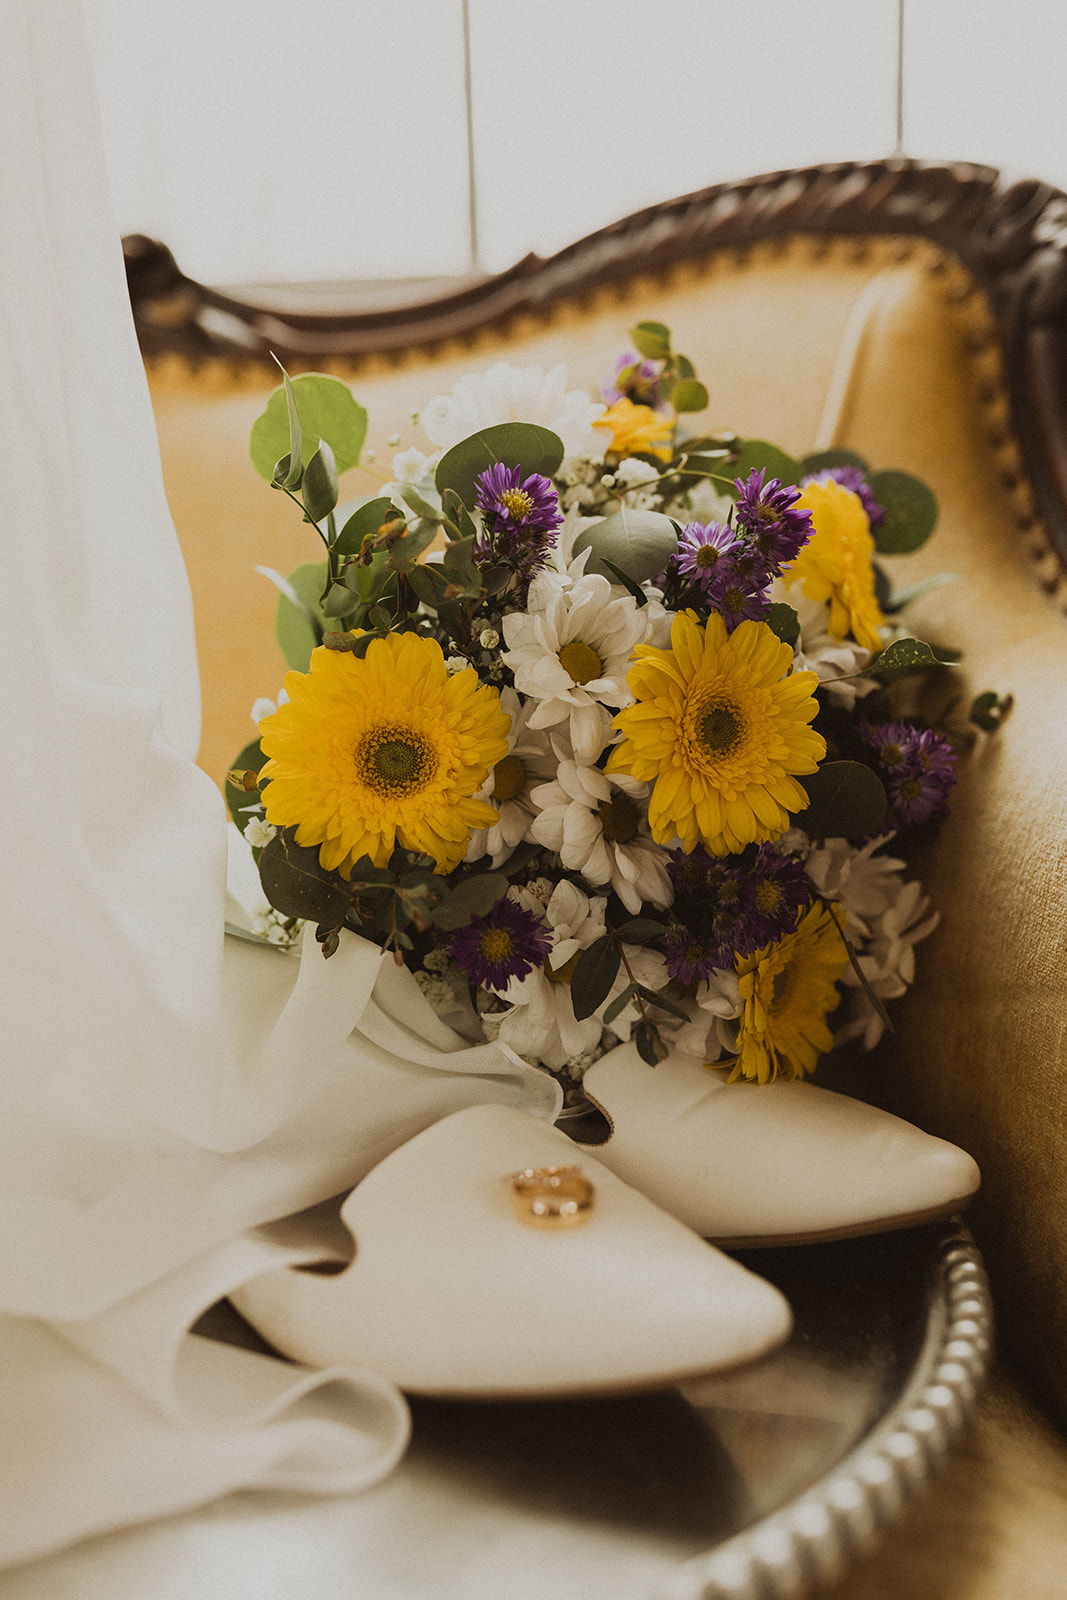 Brides bouquet waits patiently as she prepares for her dreamy upstate New York wedding day